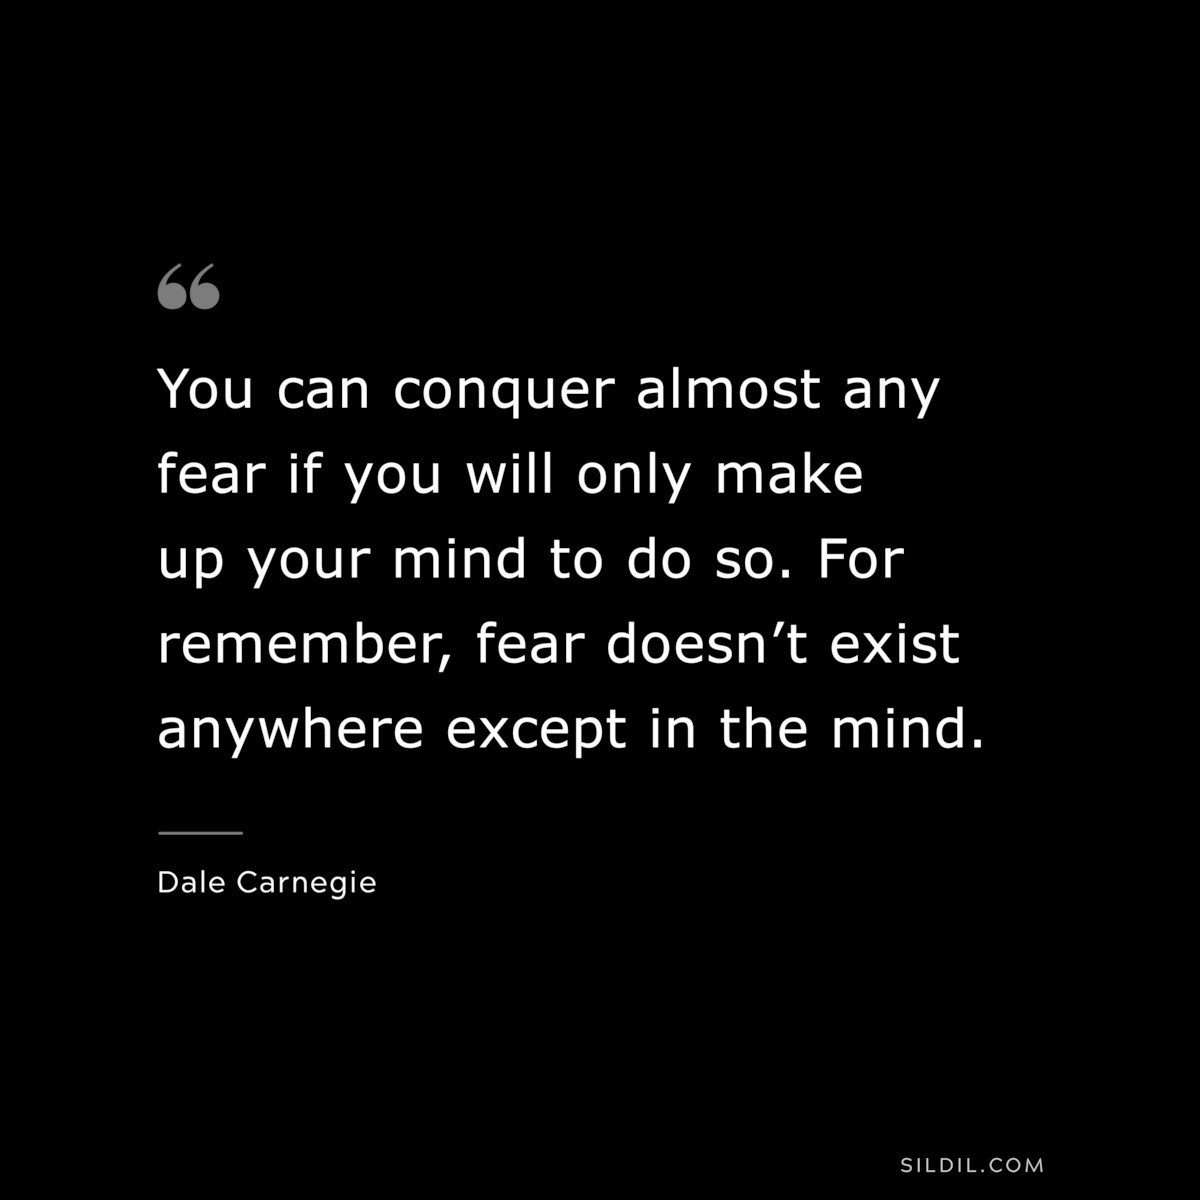 You can conquer almost any fear if you will only make up your mind to do so. For remember, fear doesn’t exist anywhere except in the mind.― Dale Carnegie